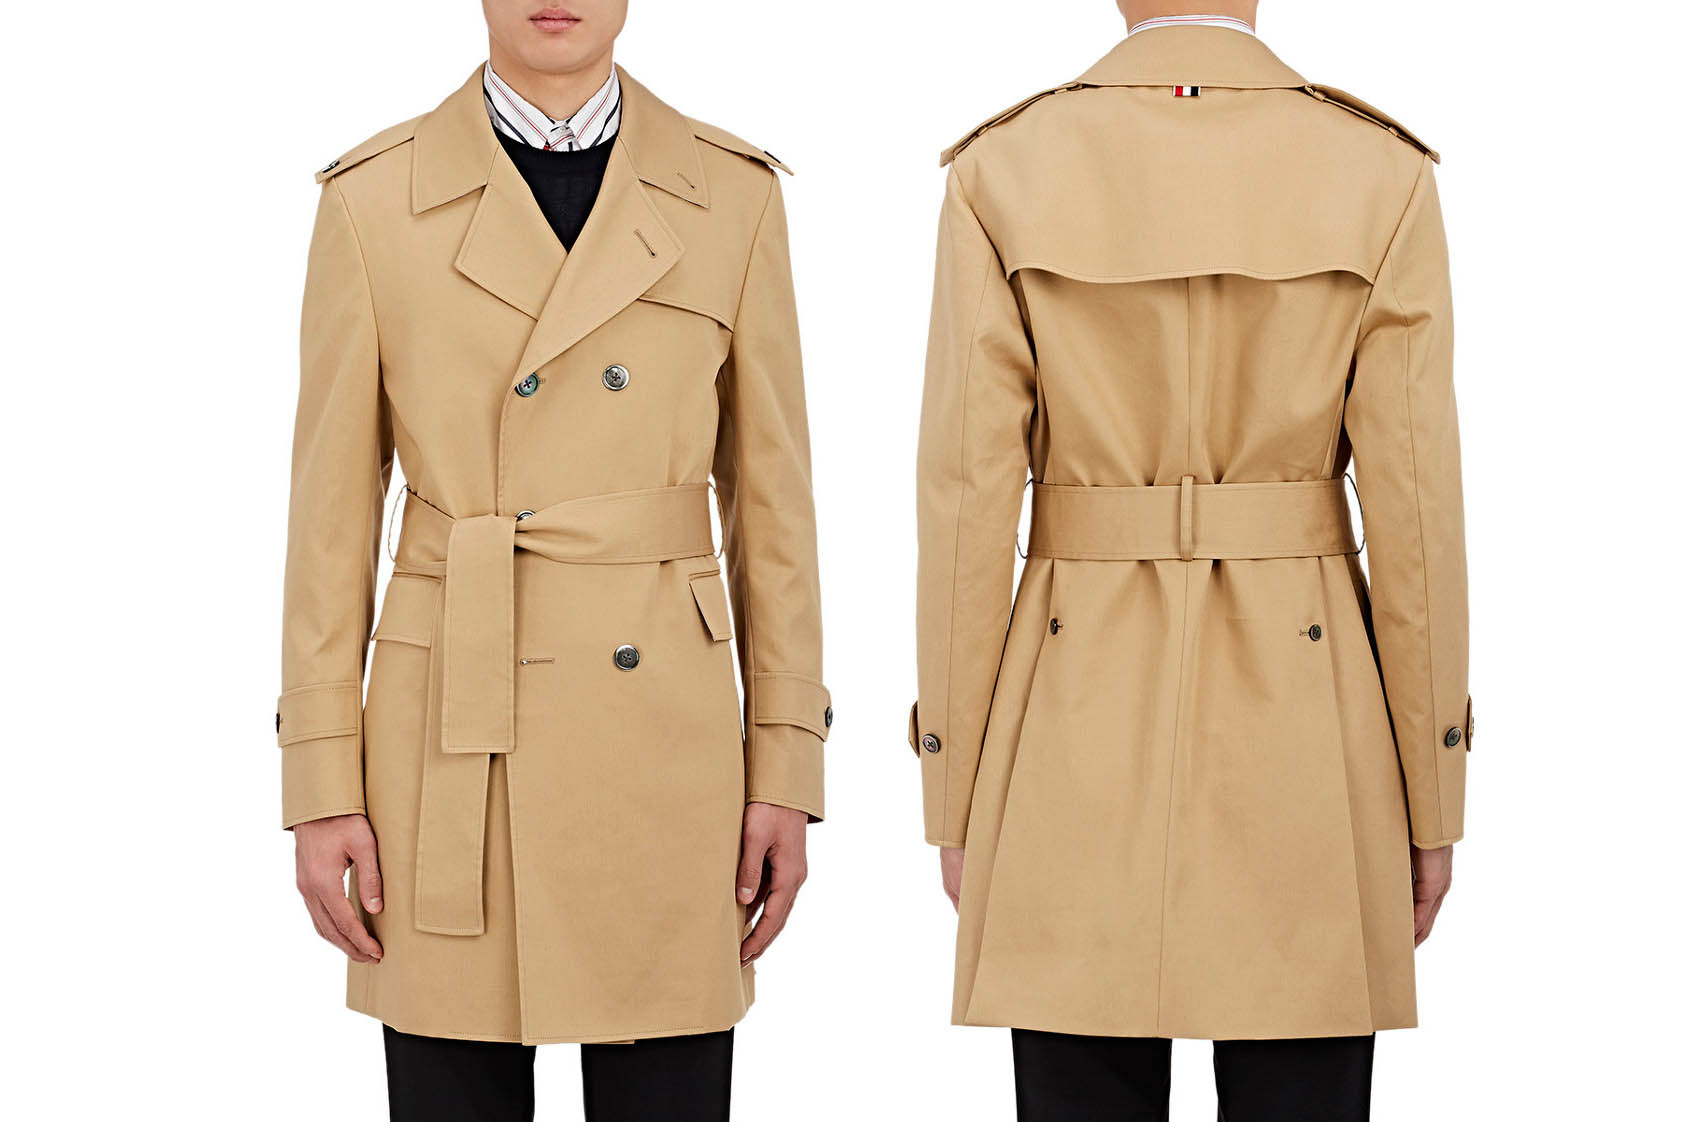 This Is The Best Trench Coat For Men, Pictures Of Mens Trench Coat With Hood